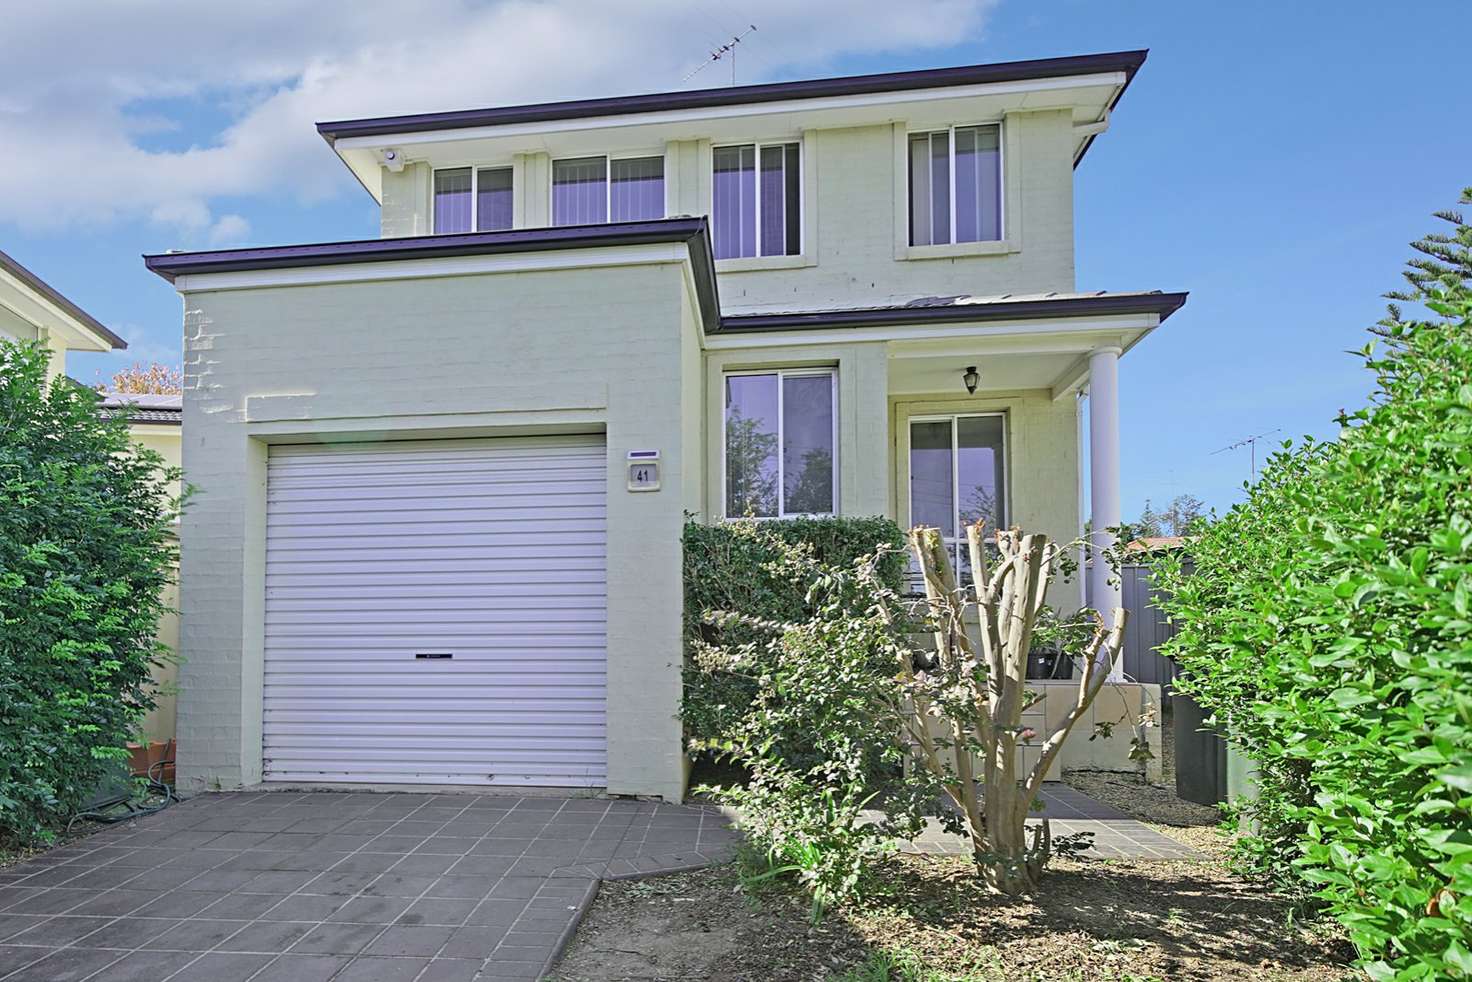 Main view of Homely house listing, 41 High Street, Campbelltown NSW 2560